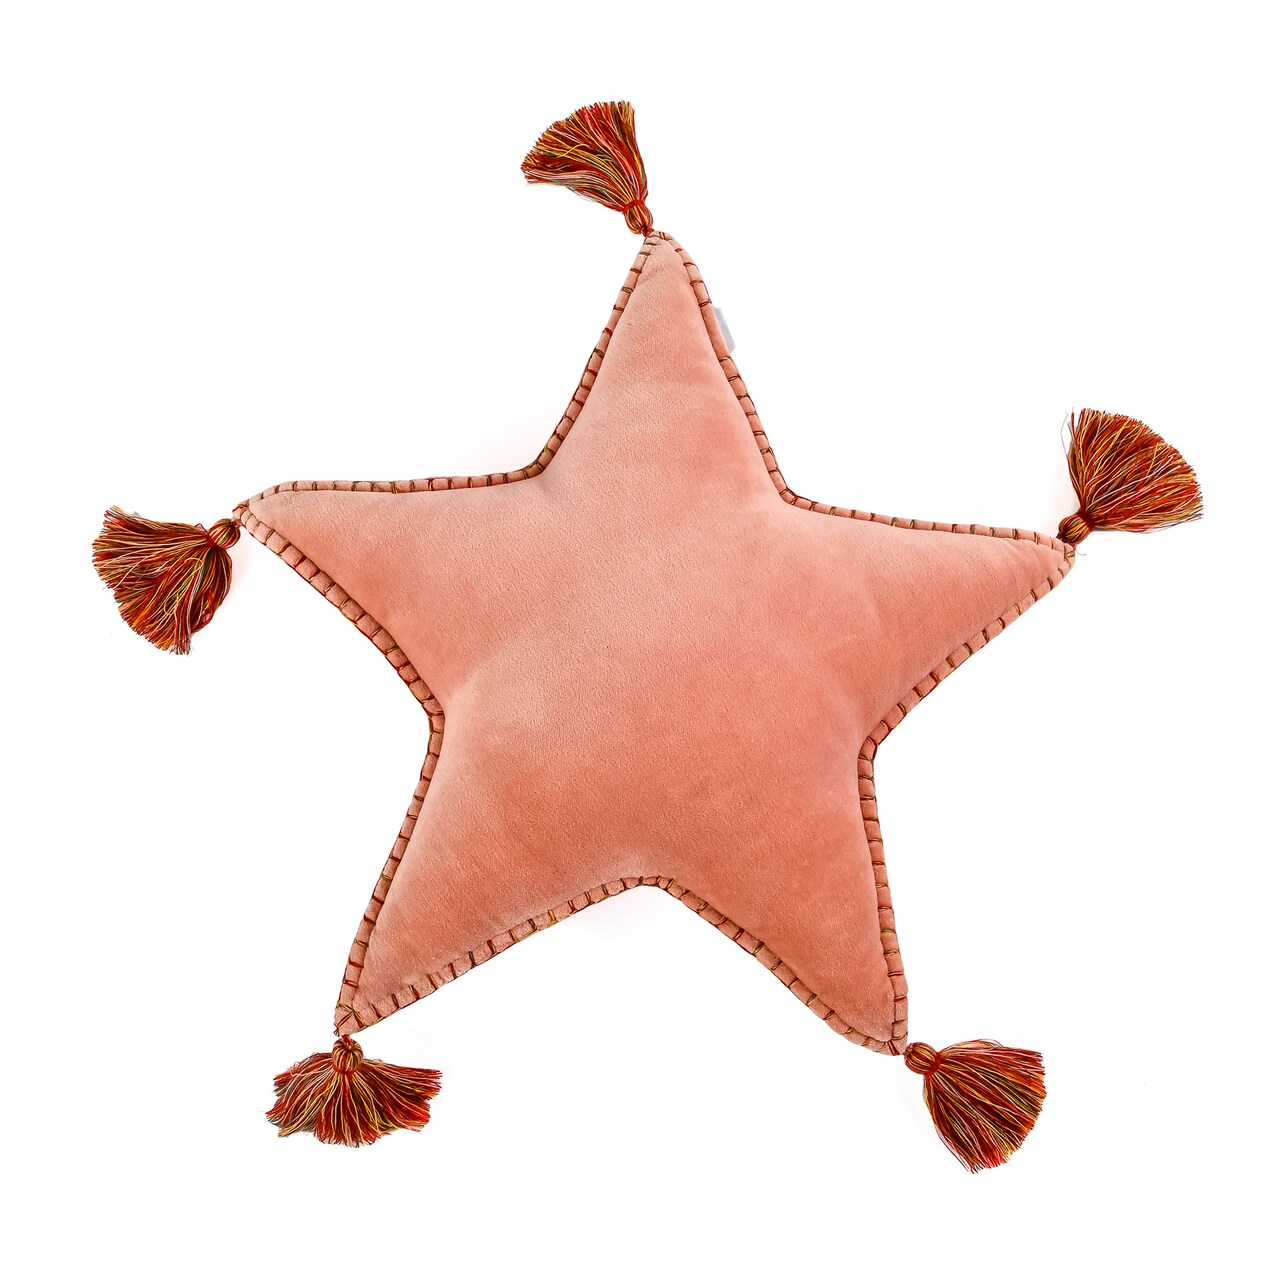 HGTV Home Collection Star Shaped Pillow With Tassels, Blush, 16in